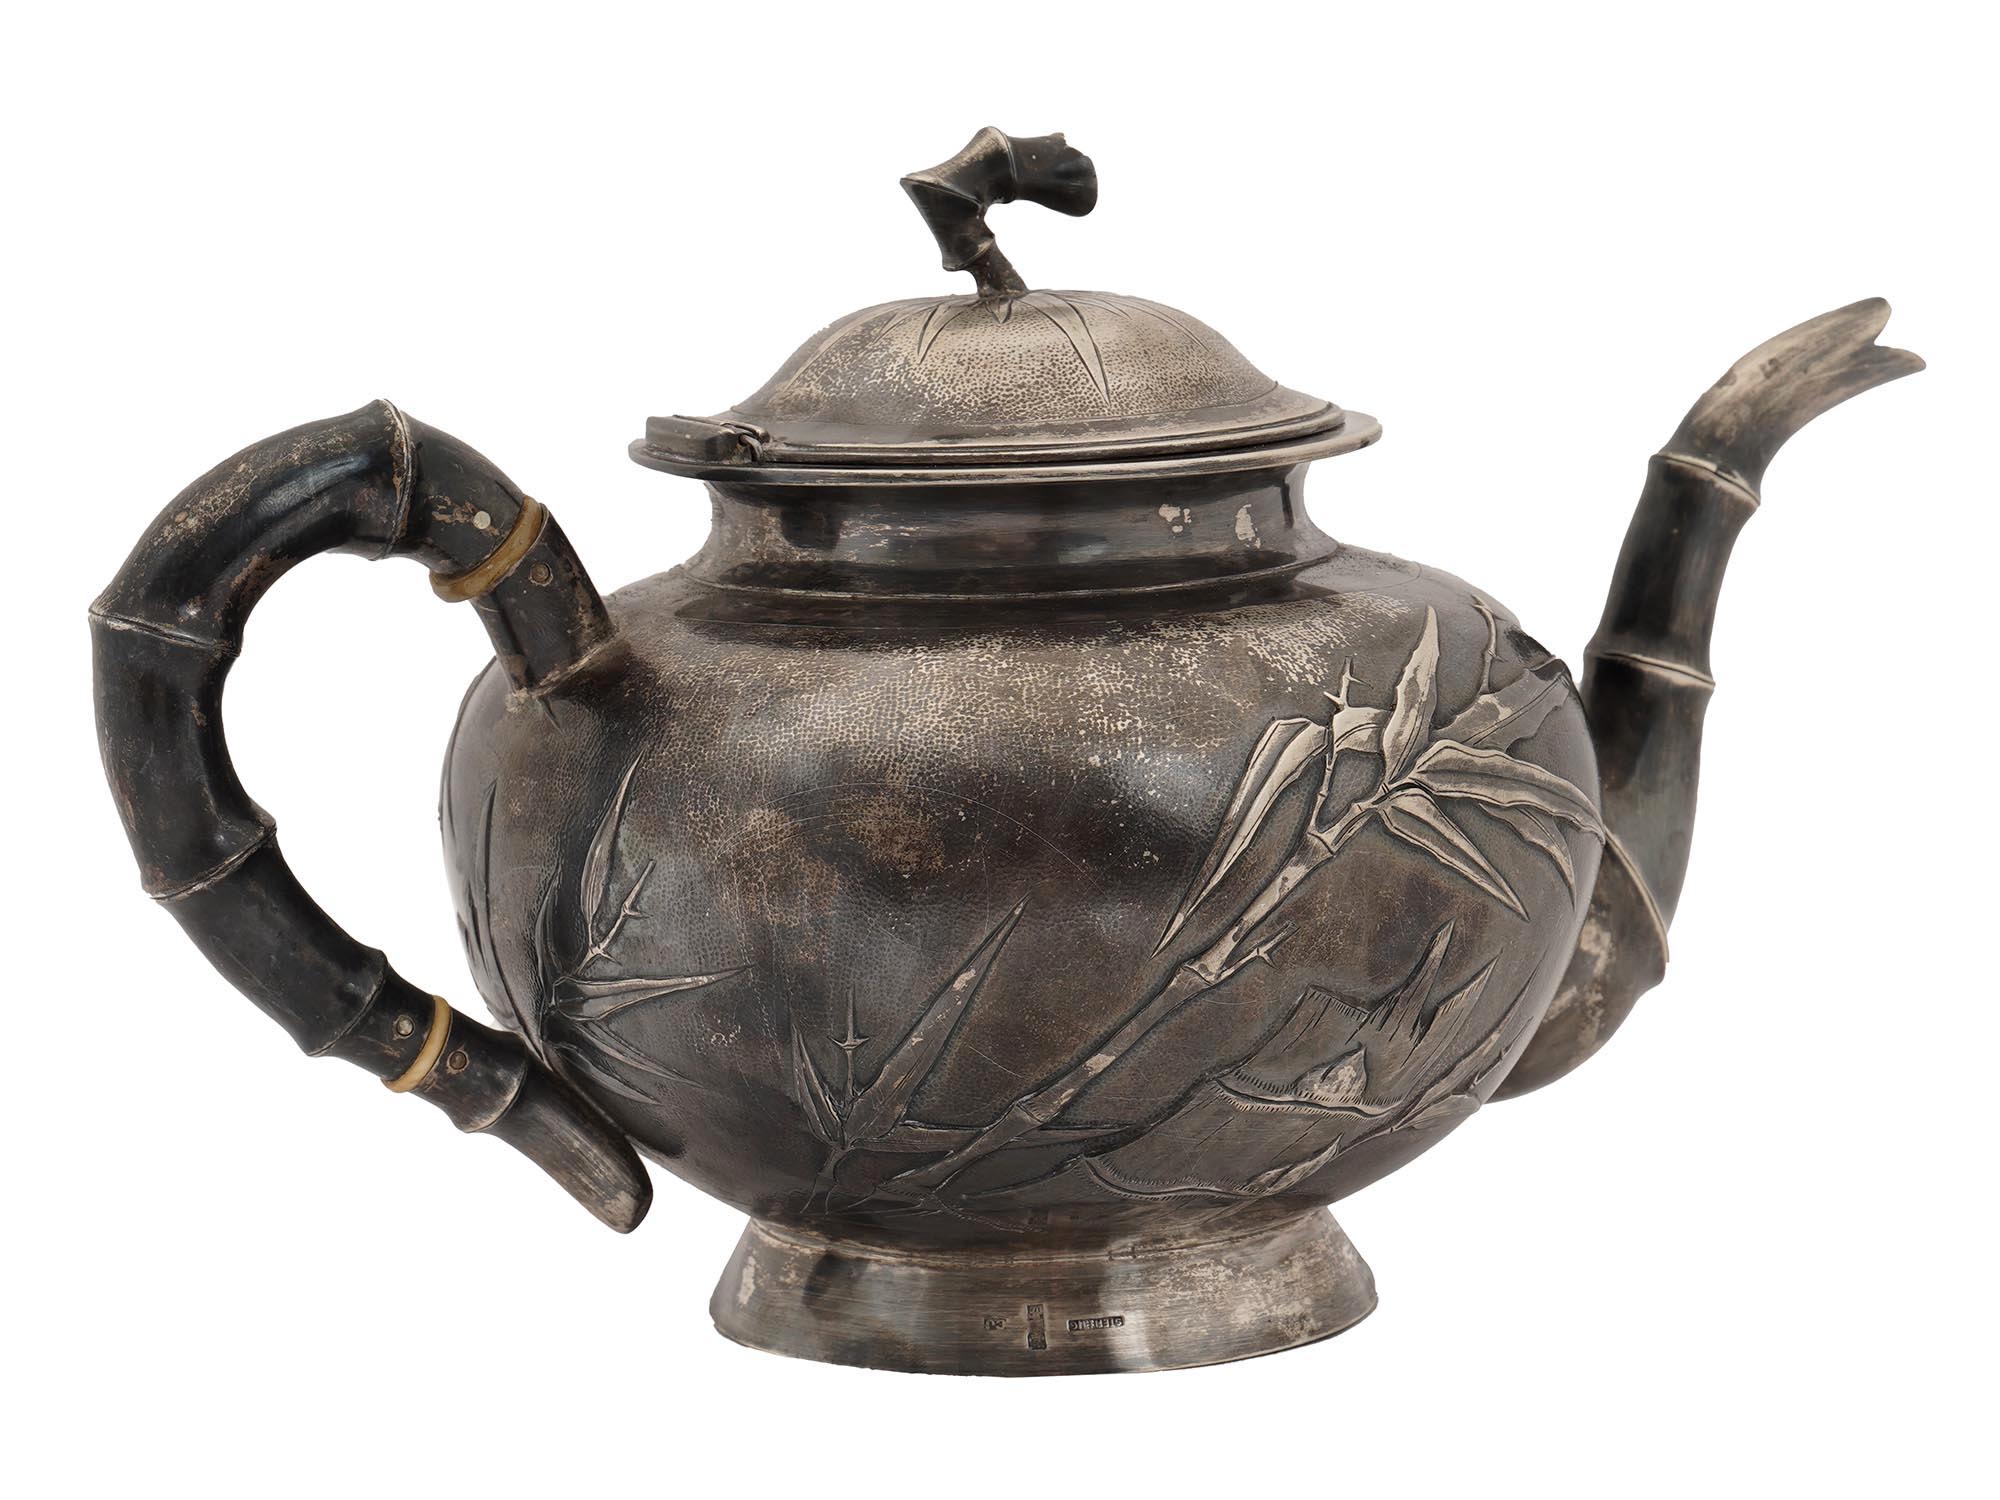 ANTIQUE JAPANESE SILVER BAMBOO DECORATED TEAPOT PIC-1